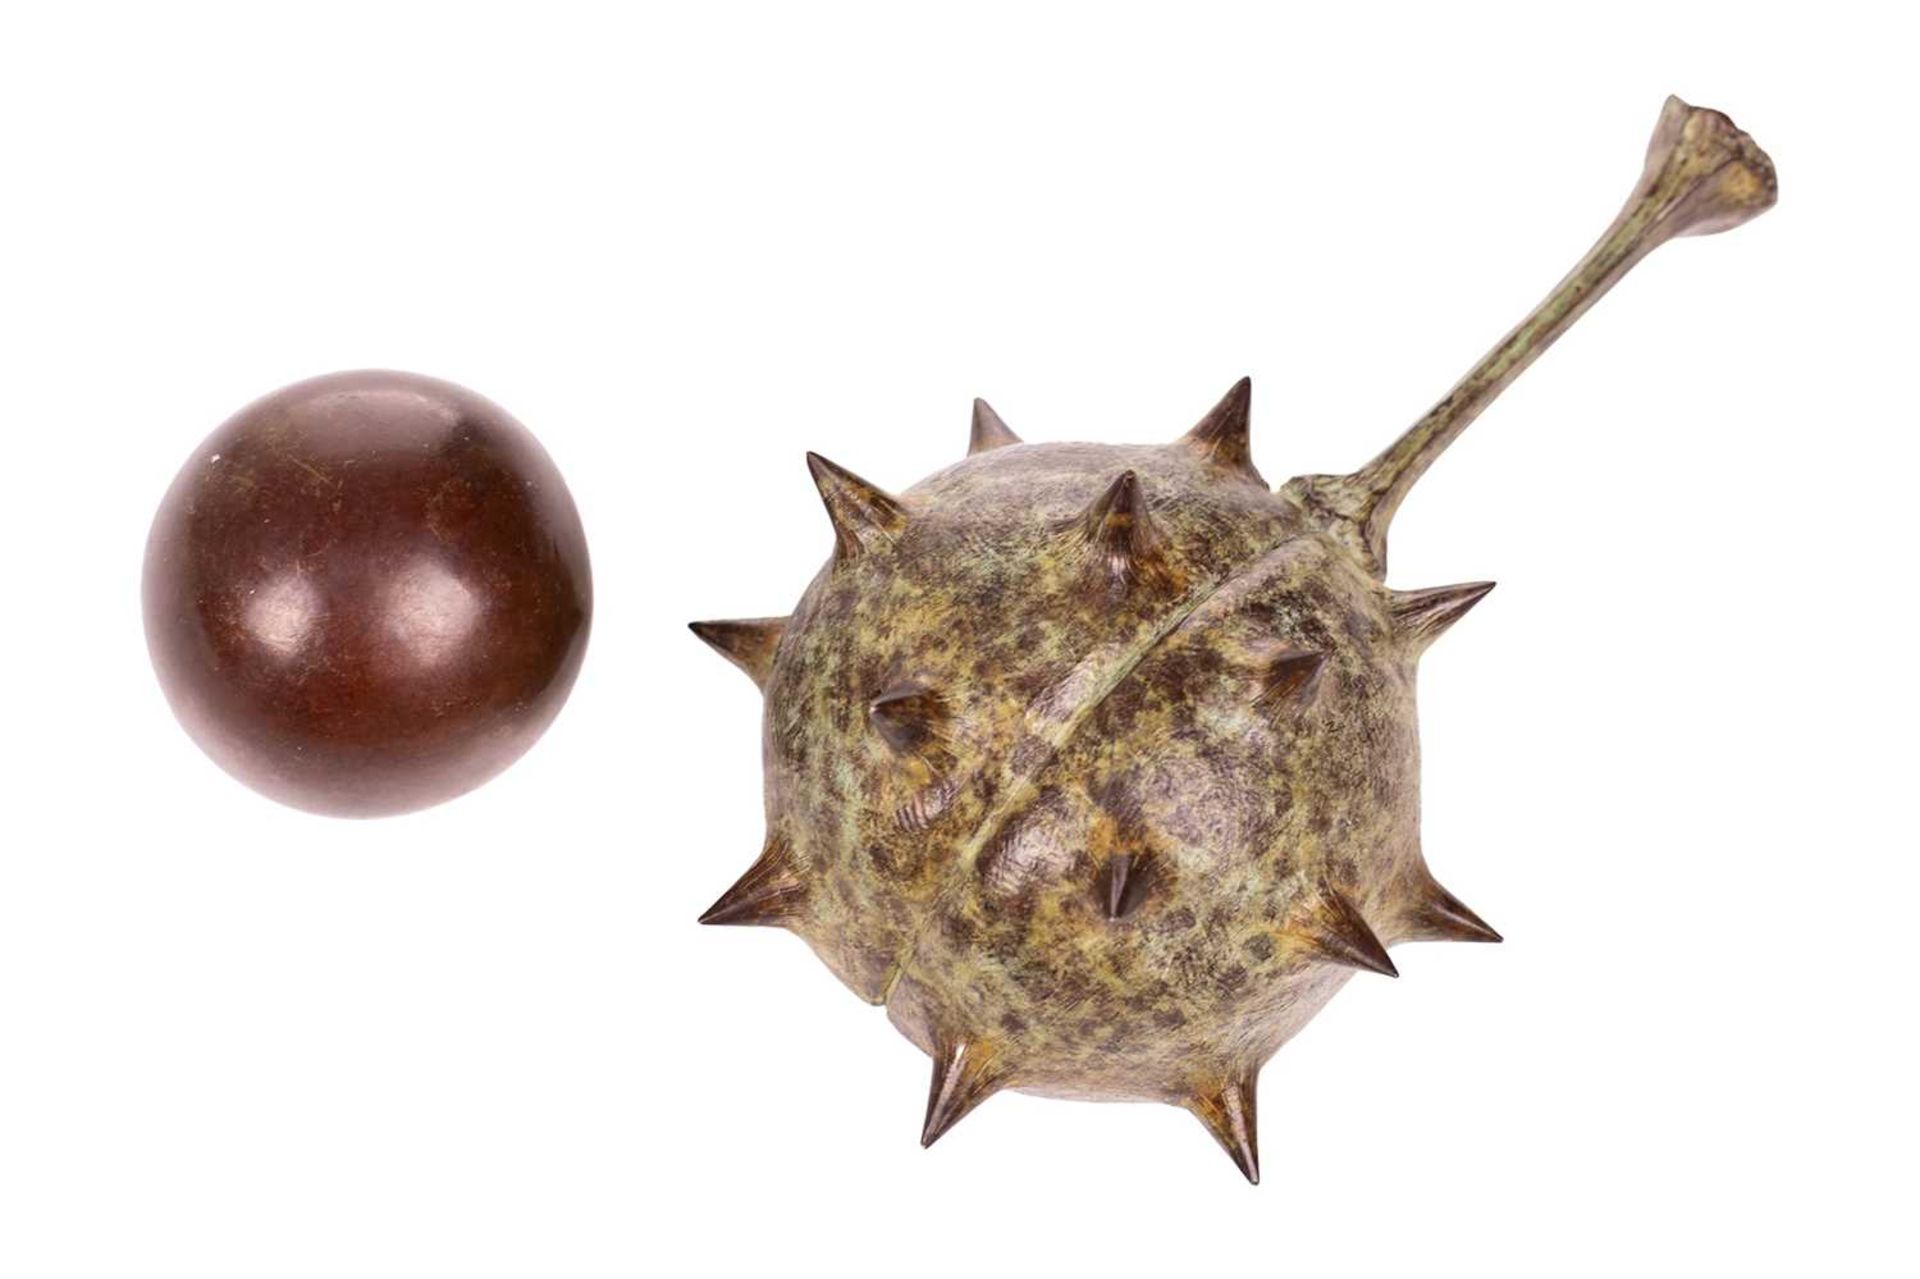 Mark Hall (b.1970), 'Self Harm' (Popping Out), bronze study of a conker in a half-opened casing, 11  - Image 2 of 14